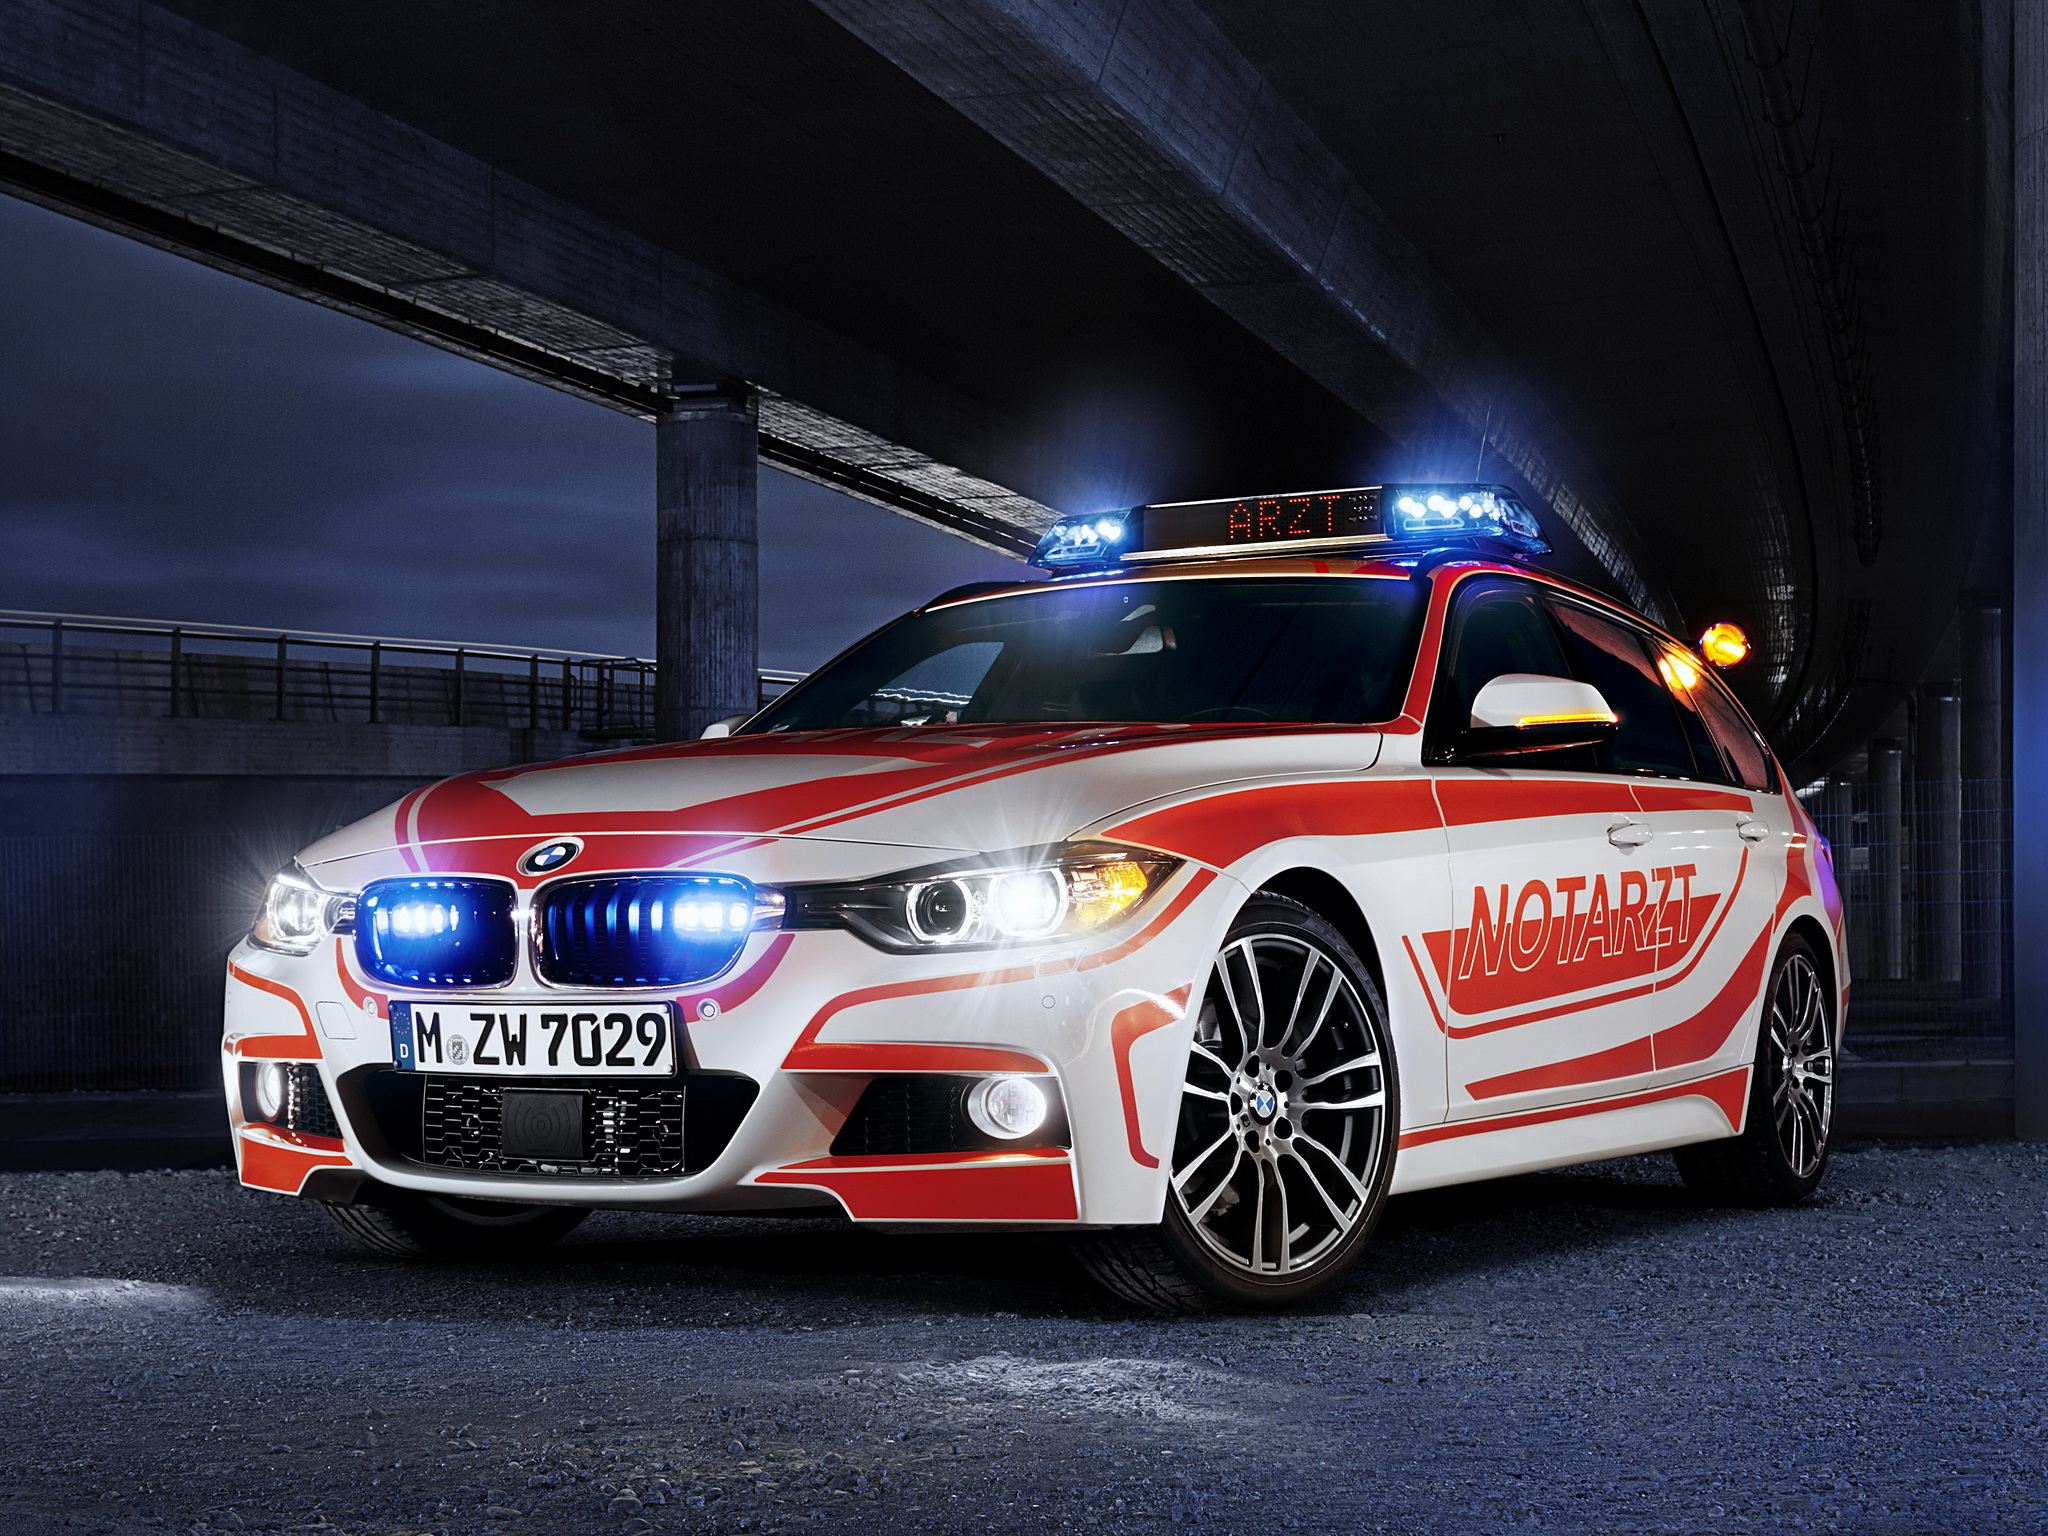 2013, Bmw, 3 series, Touring, M, Sport, Package, Notarzt, F31, Ambulance, Emergency, Tuning Wallpaper